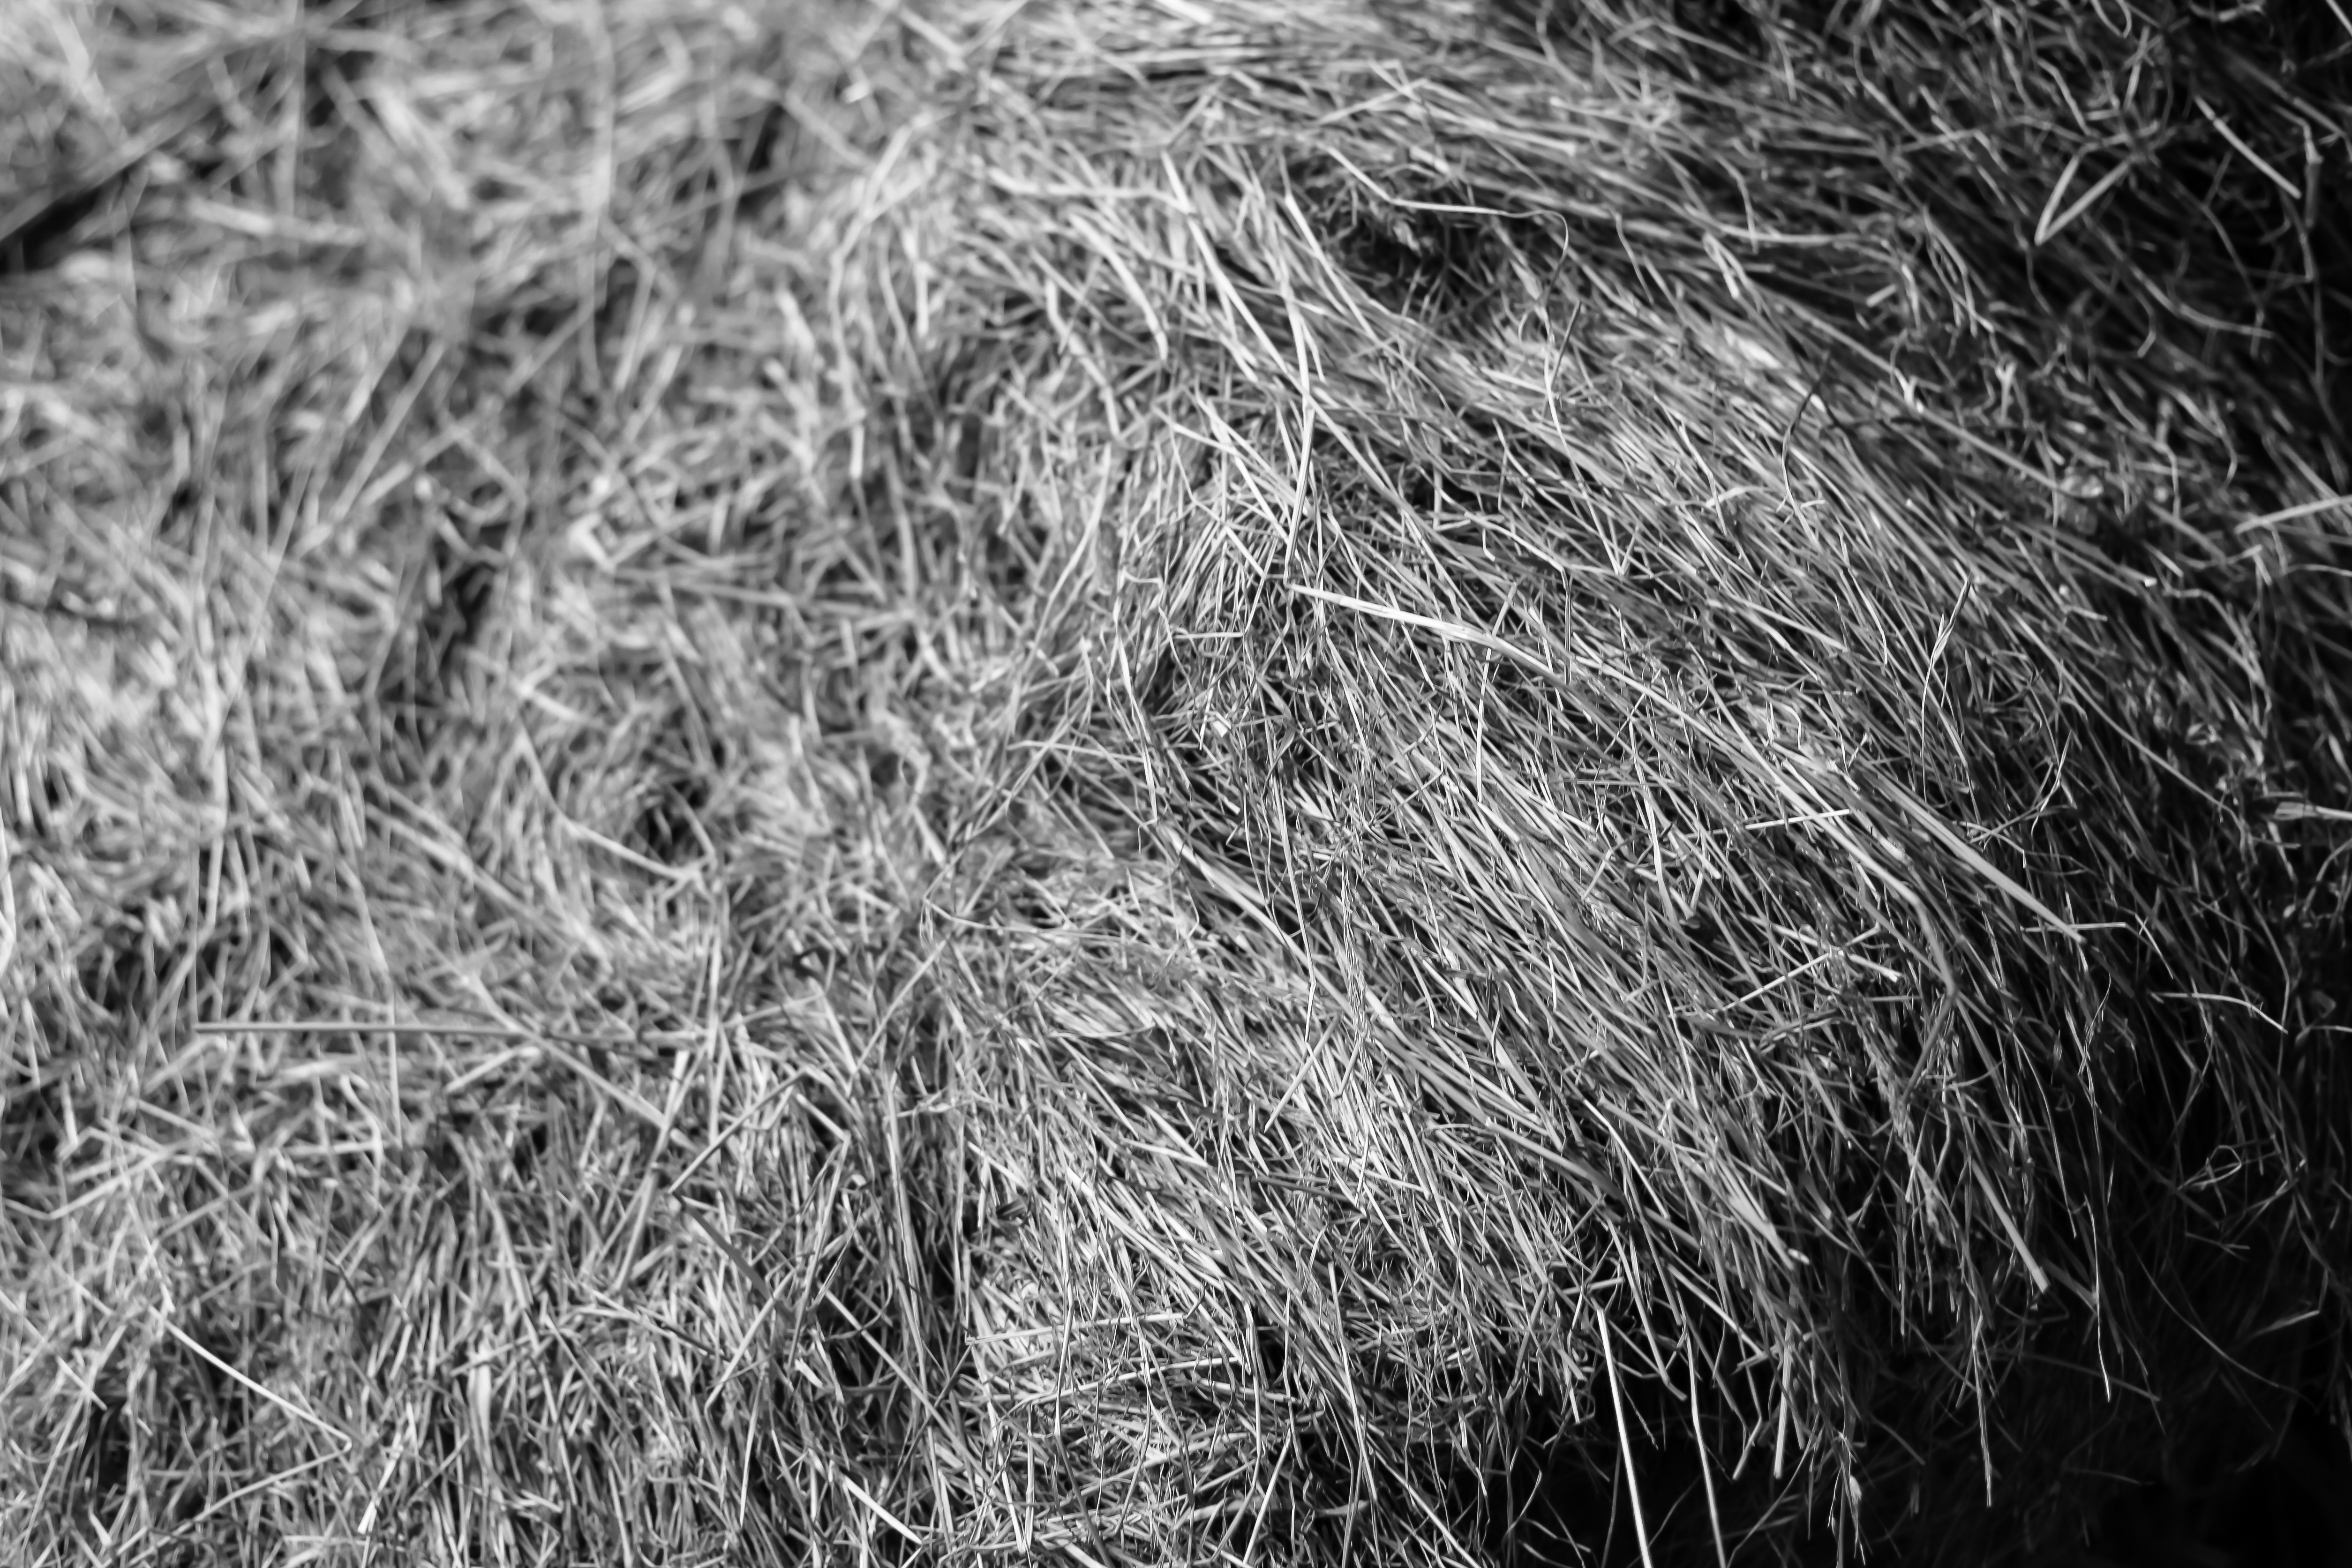 Abstract B&W Grass Texture, Abstract, Black, Dry, Grass, HQ Photo